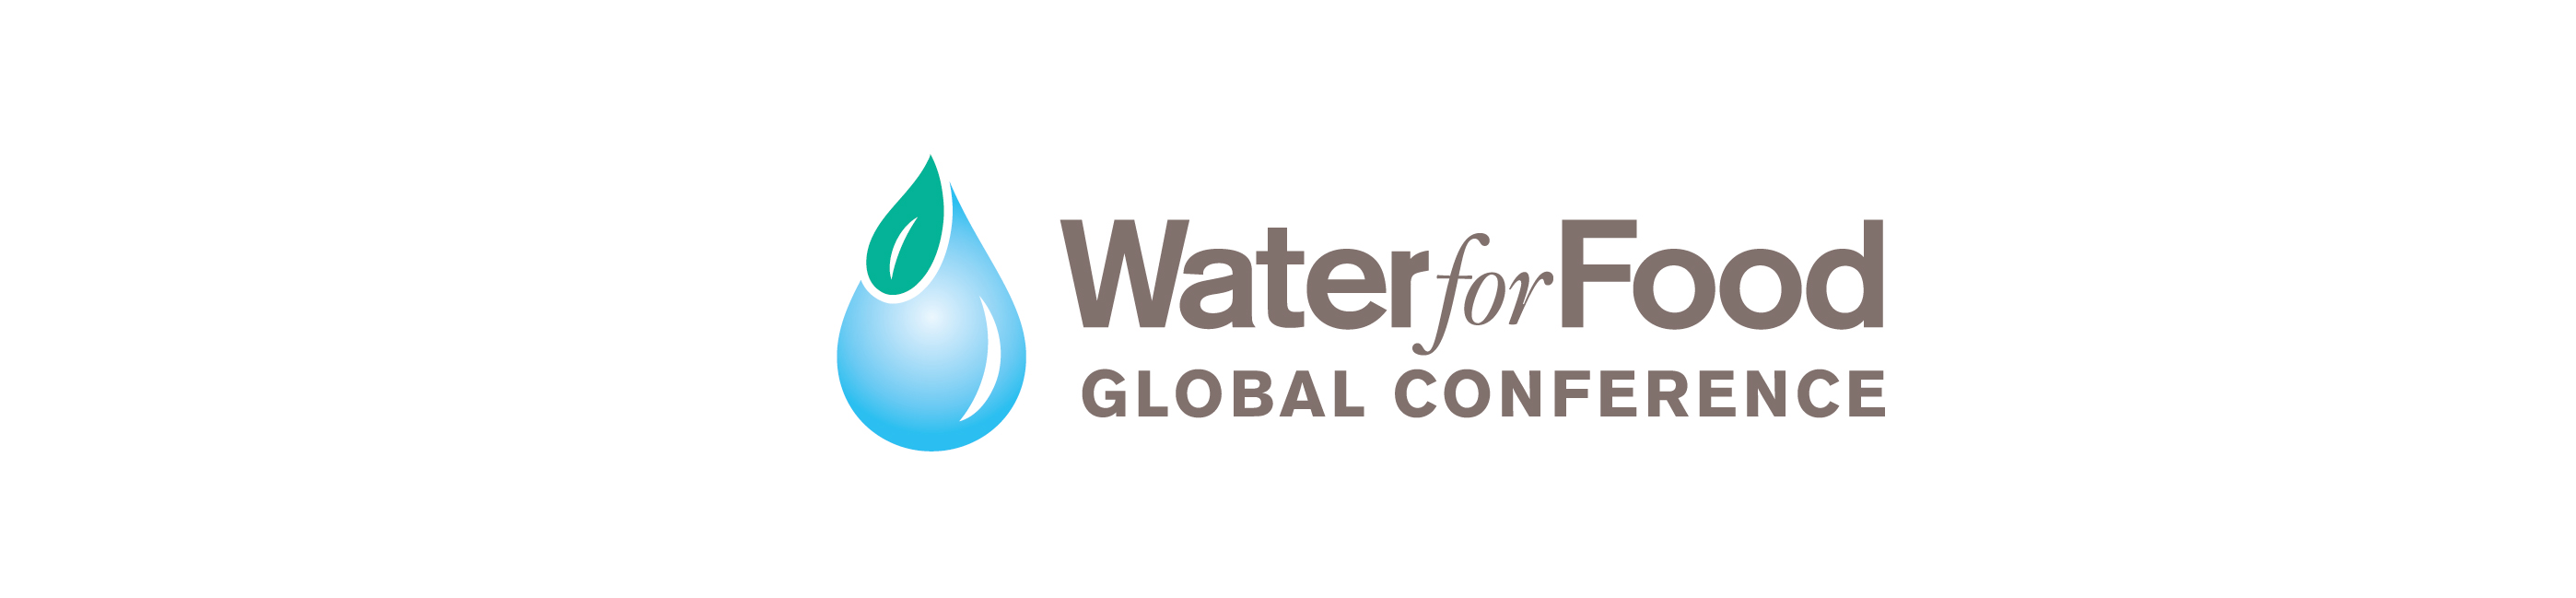 'Water for Food' conference set for Seattle in 2014 Announce